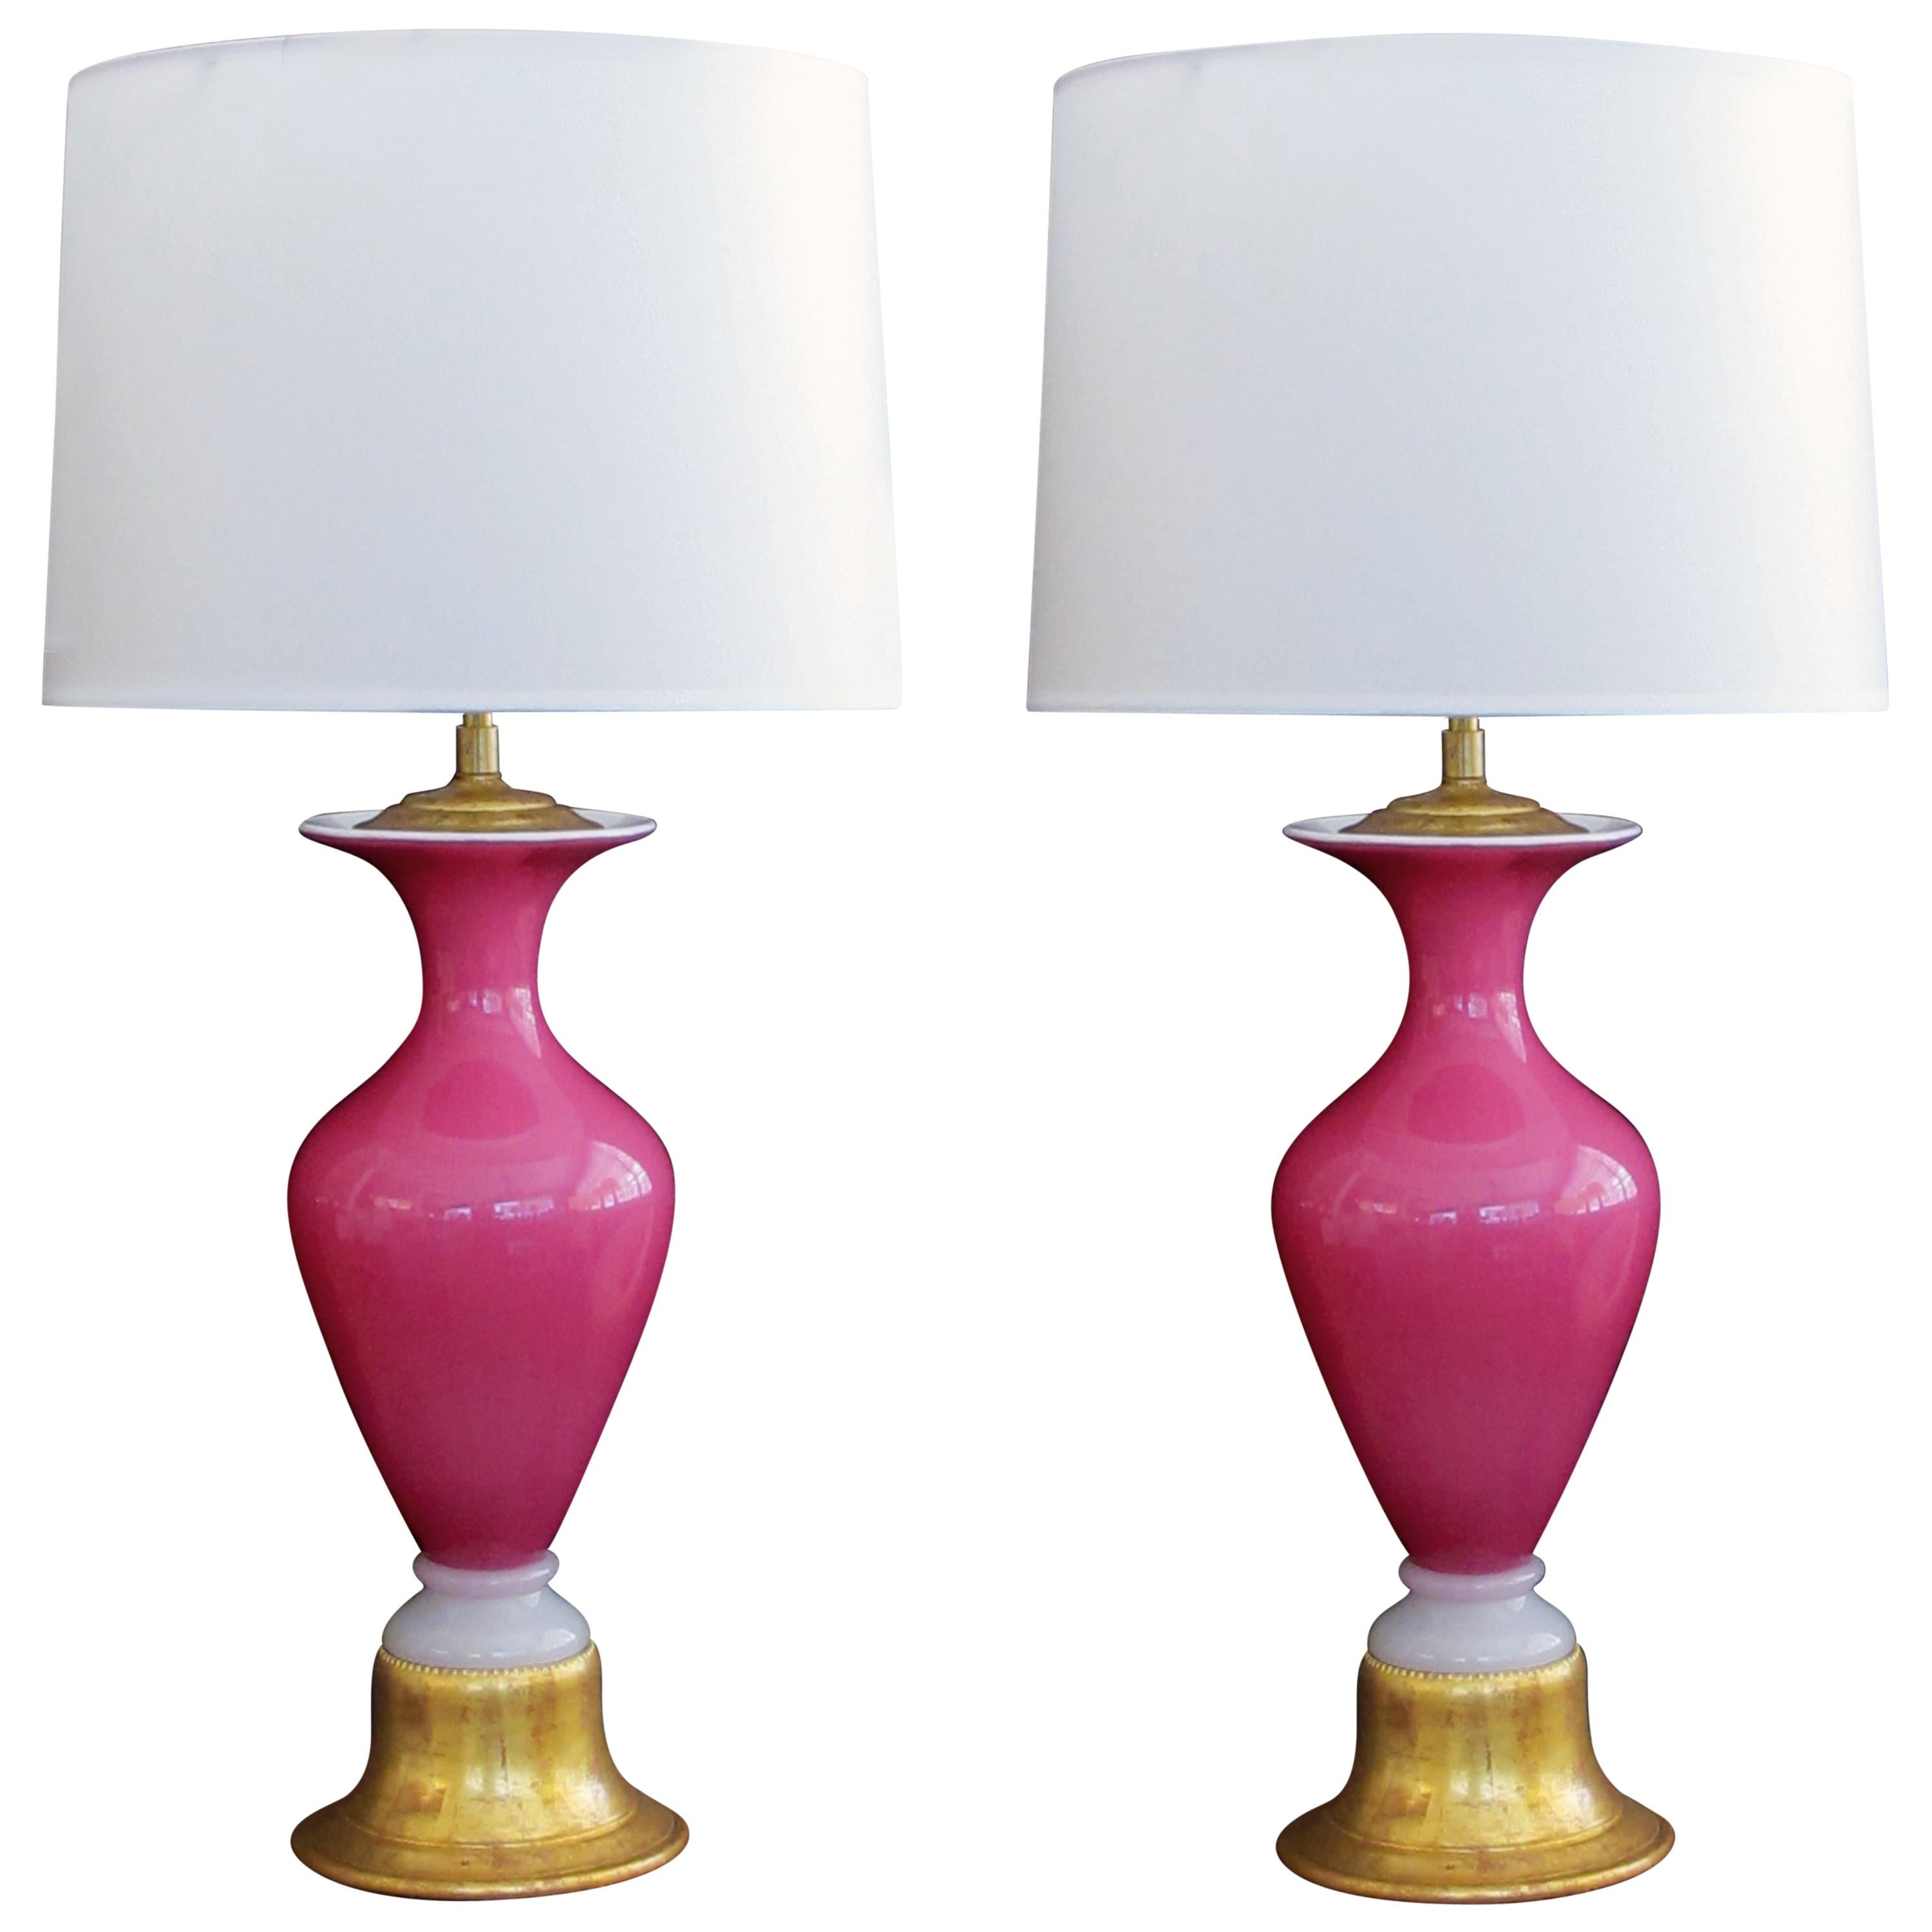 Striking Pair of Murano Midcentury Pink Cased-Glass Baluster-Form Lamps For Sale